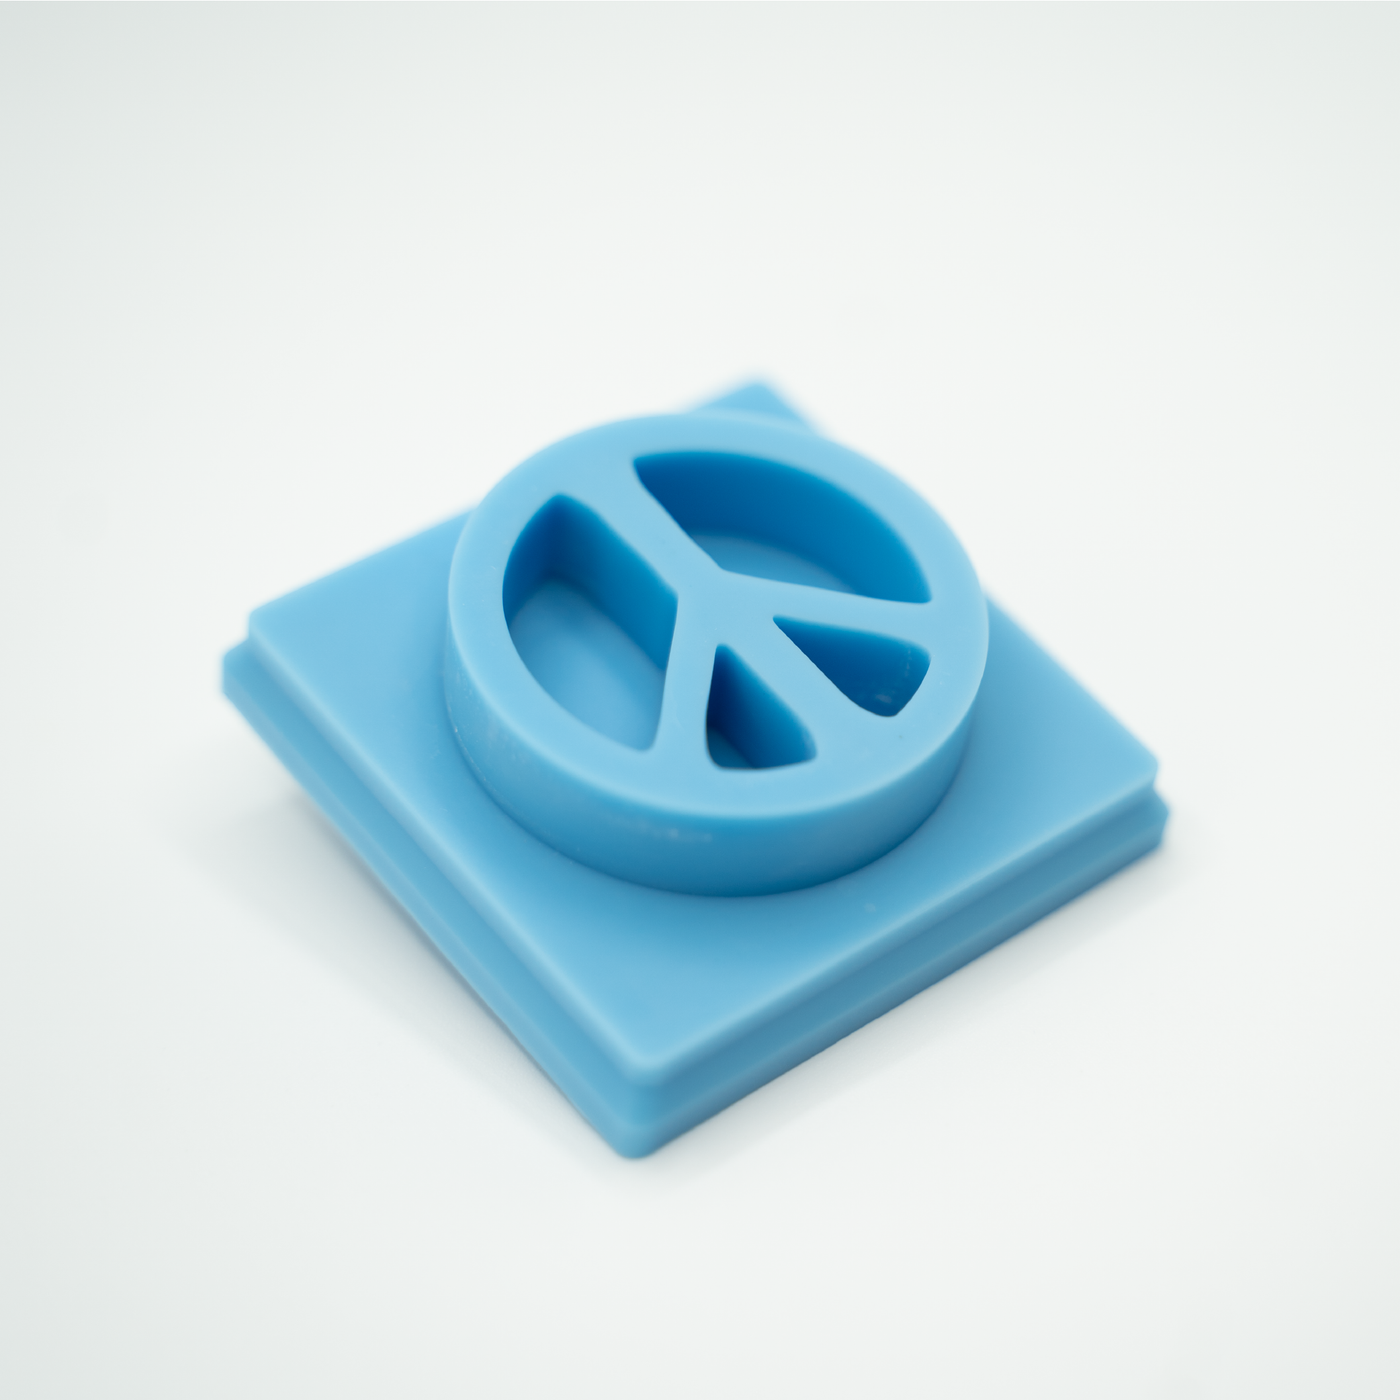 Peace Inserts - 3 Pack